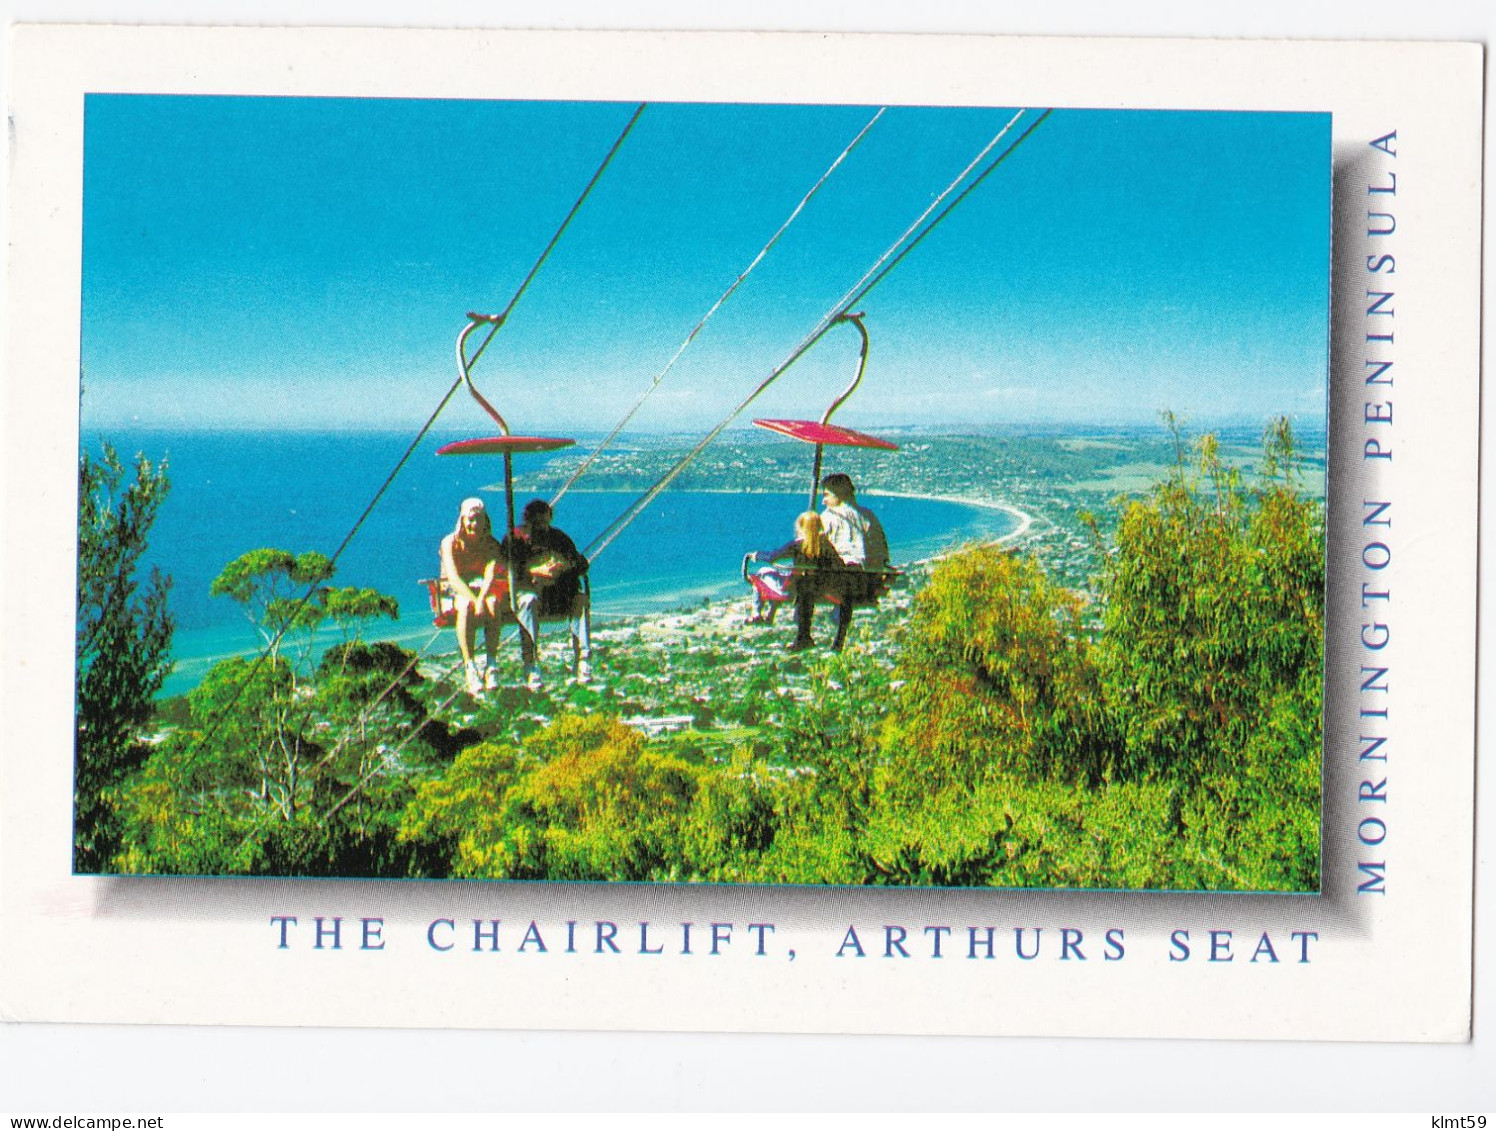 Arthurs Seat - A Panorama From The Chairlift - Mornington Peninsula